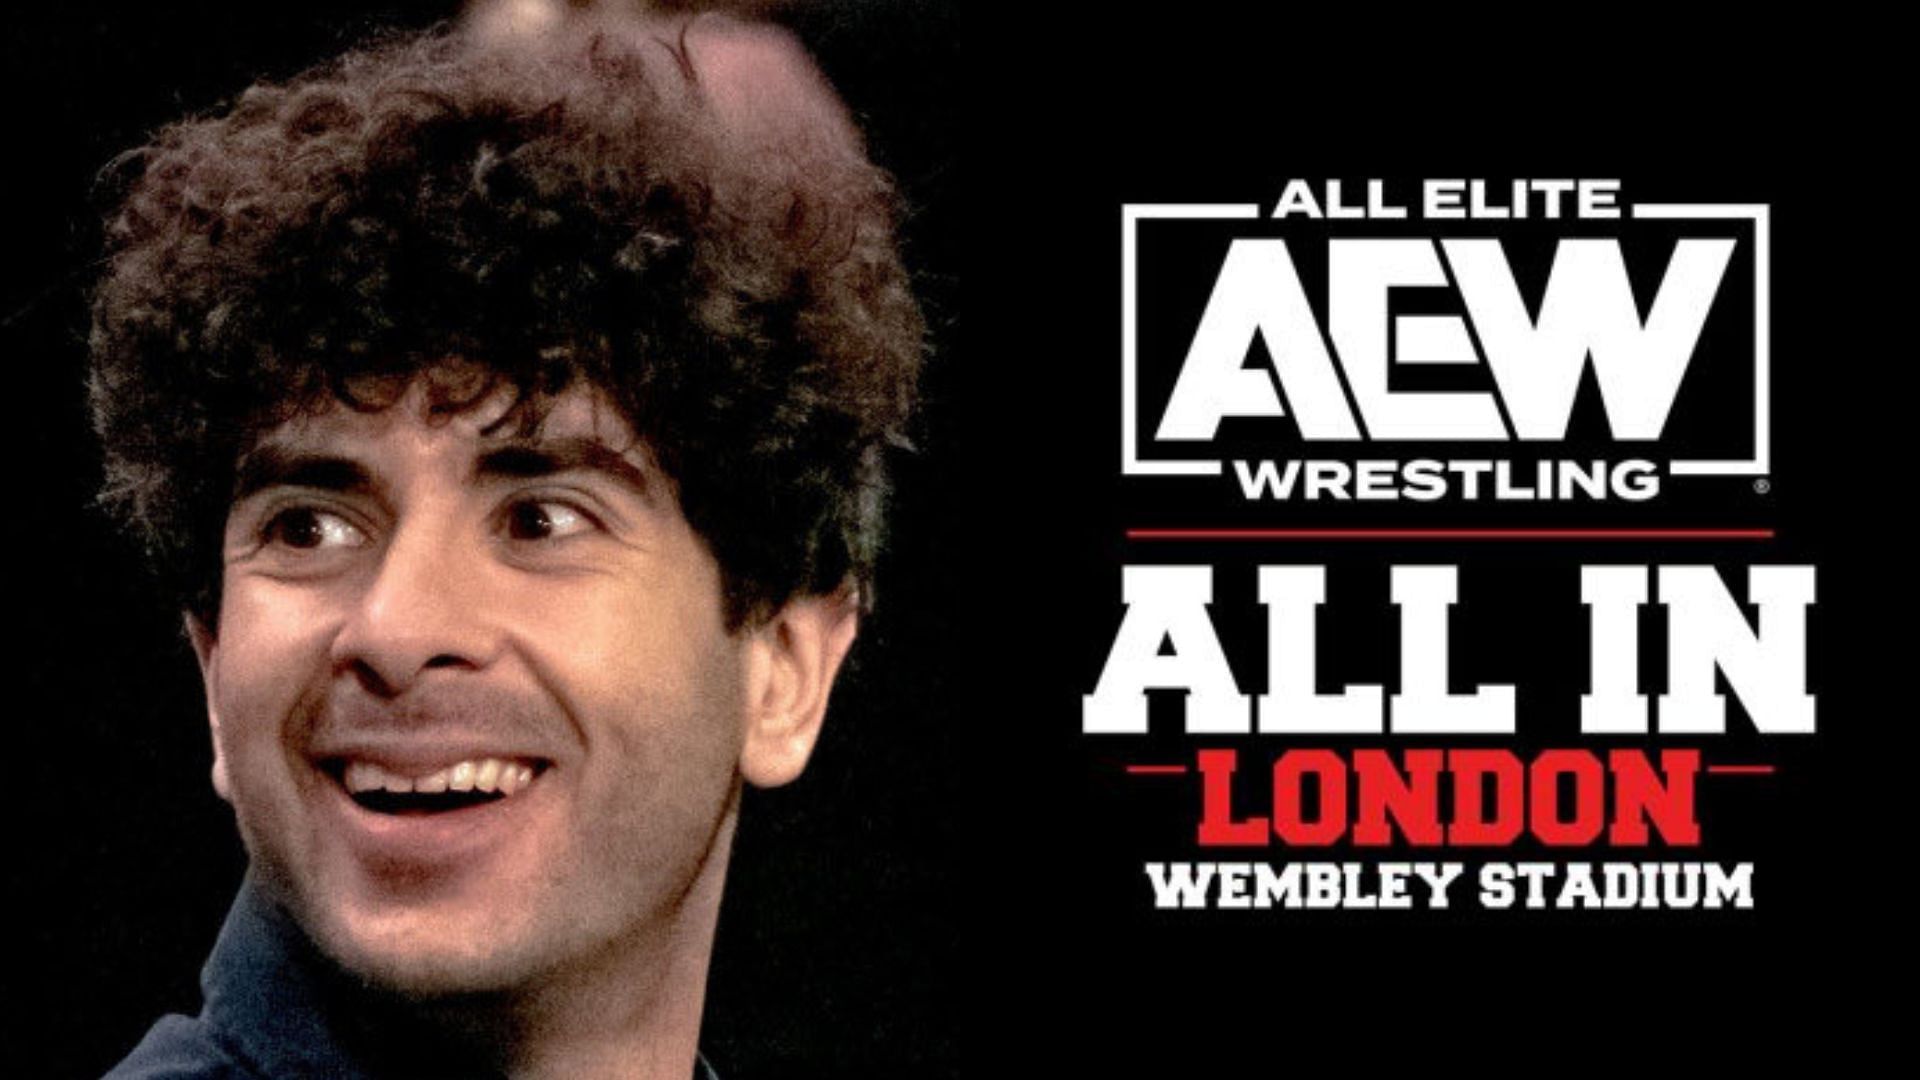 Tony Khan has made the AEW All In card even bigger!